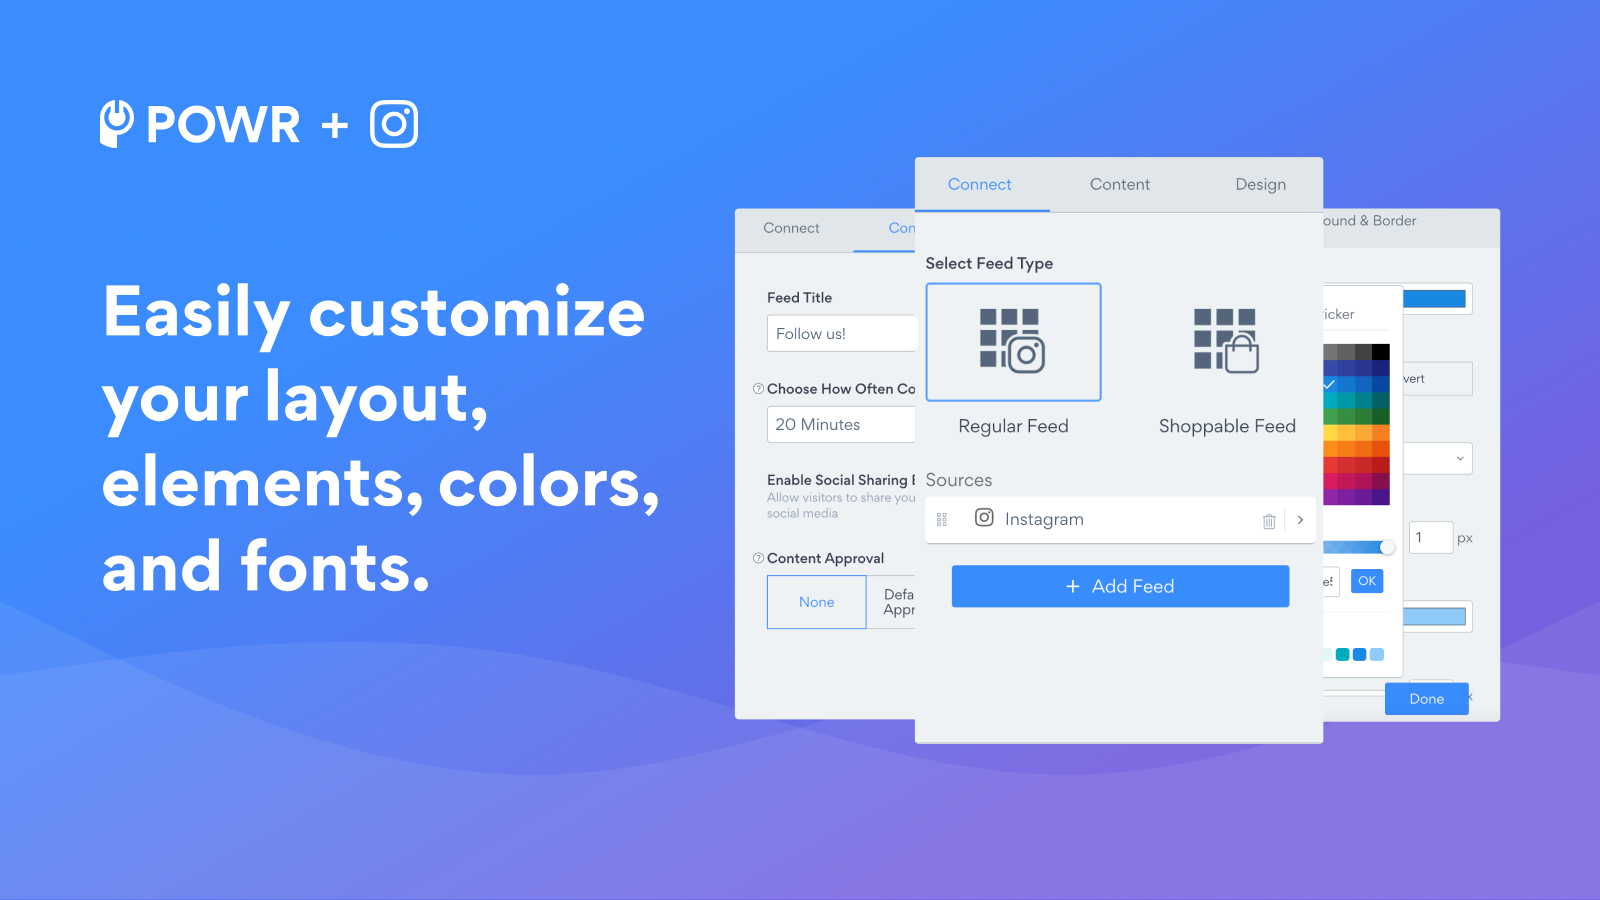 Customize your social feed layout, elements, colors and fonts.